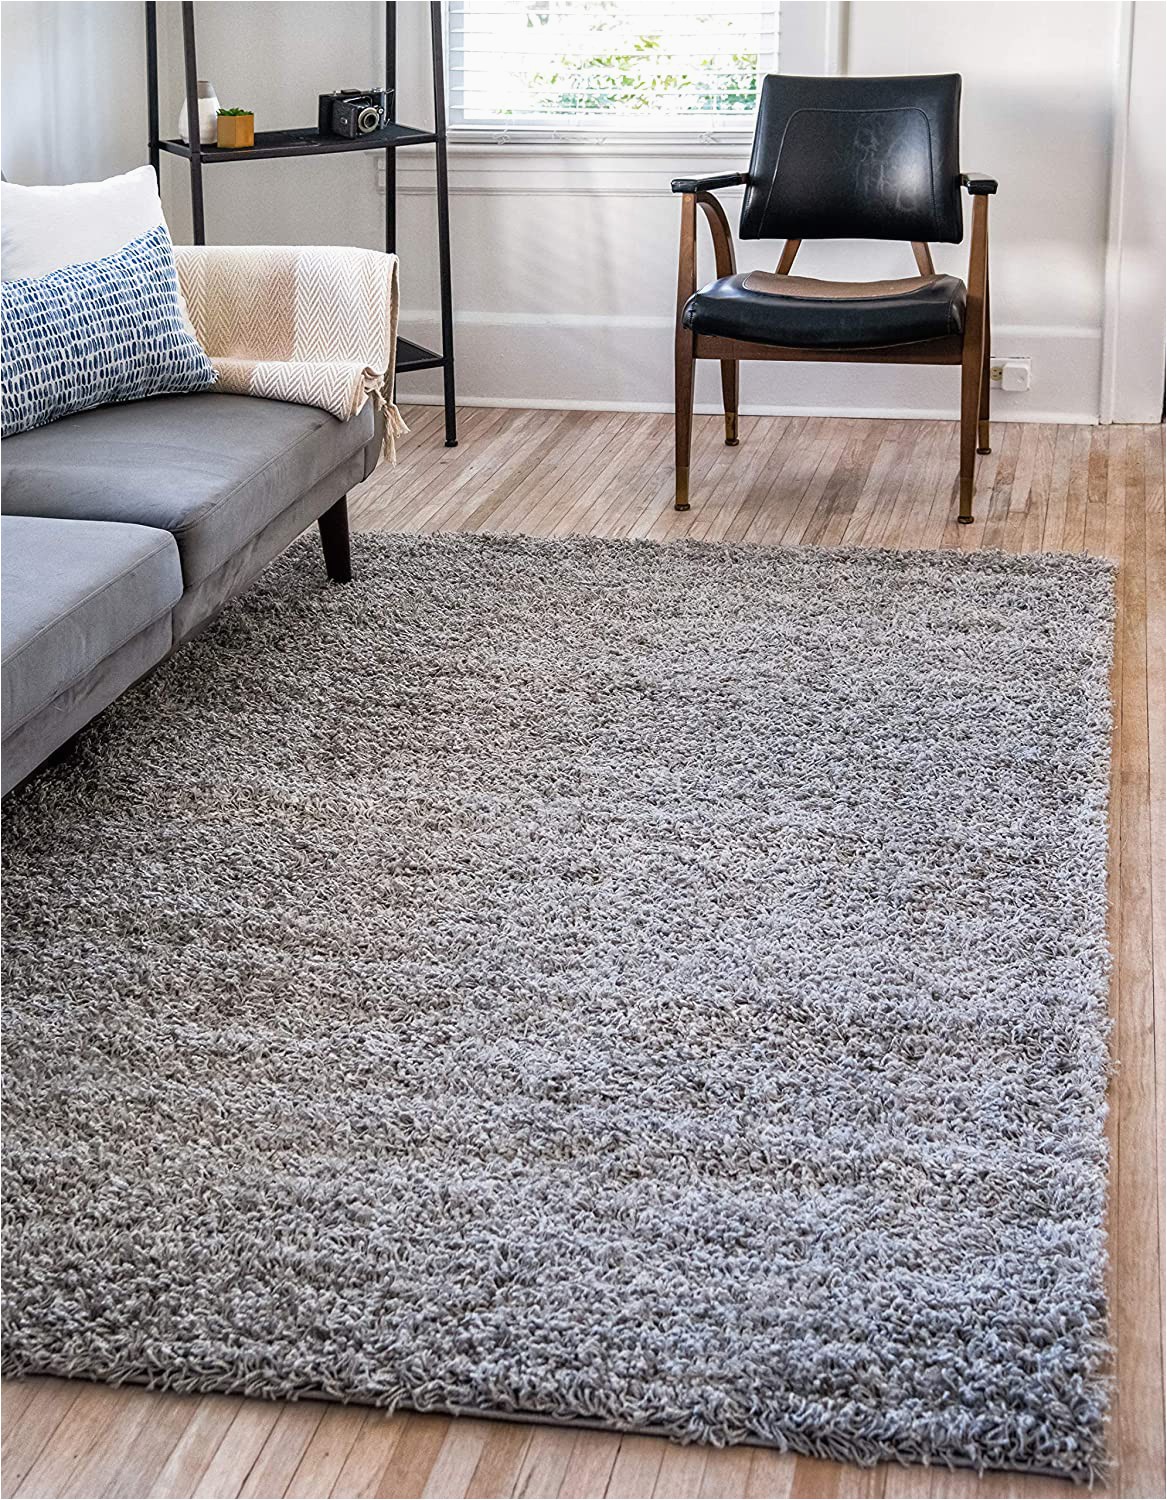 18 X 24 area Rug Unique Loom solo solid Shag Collection Modern Plush Cloud Gray area Rug 5 0 X 8 0